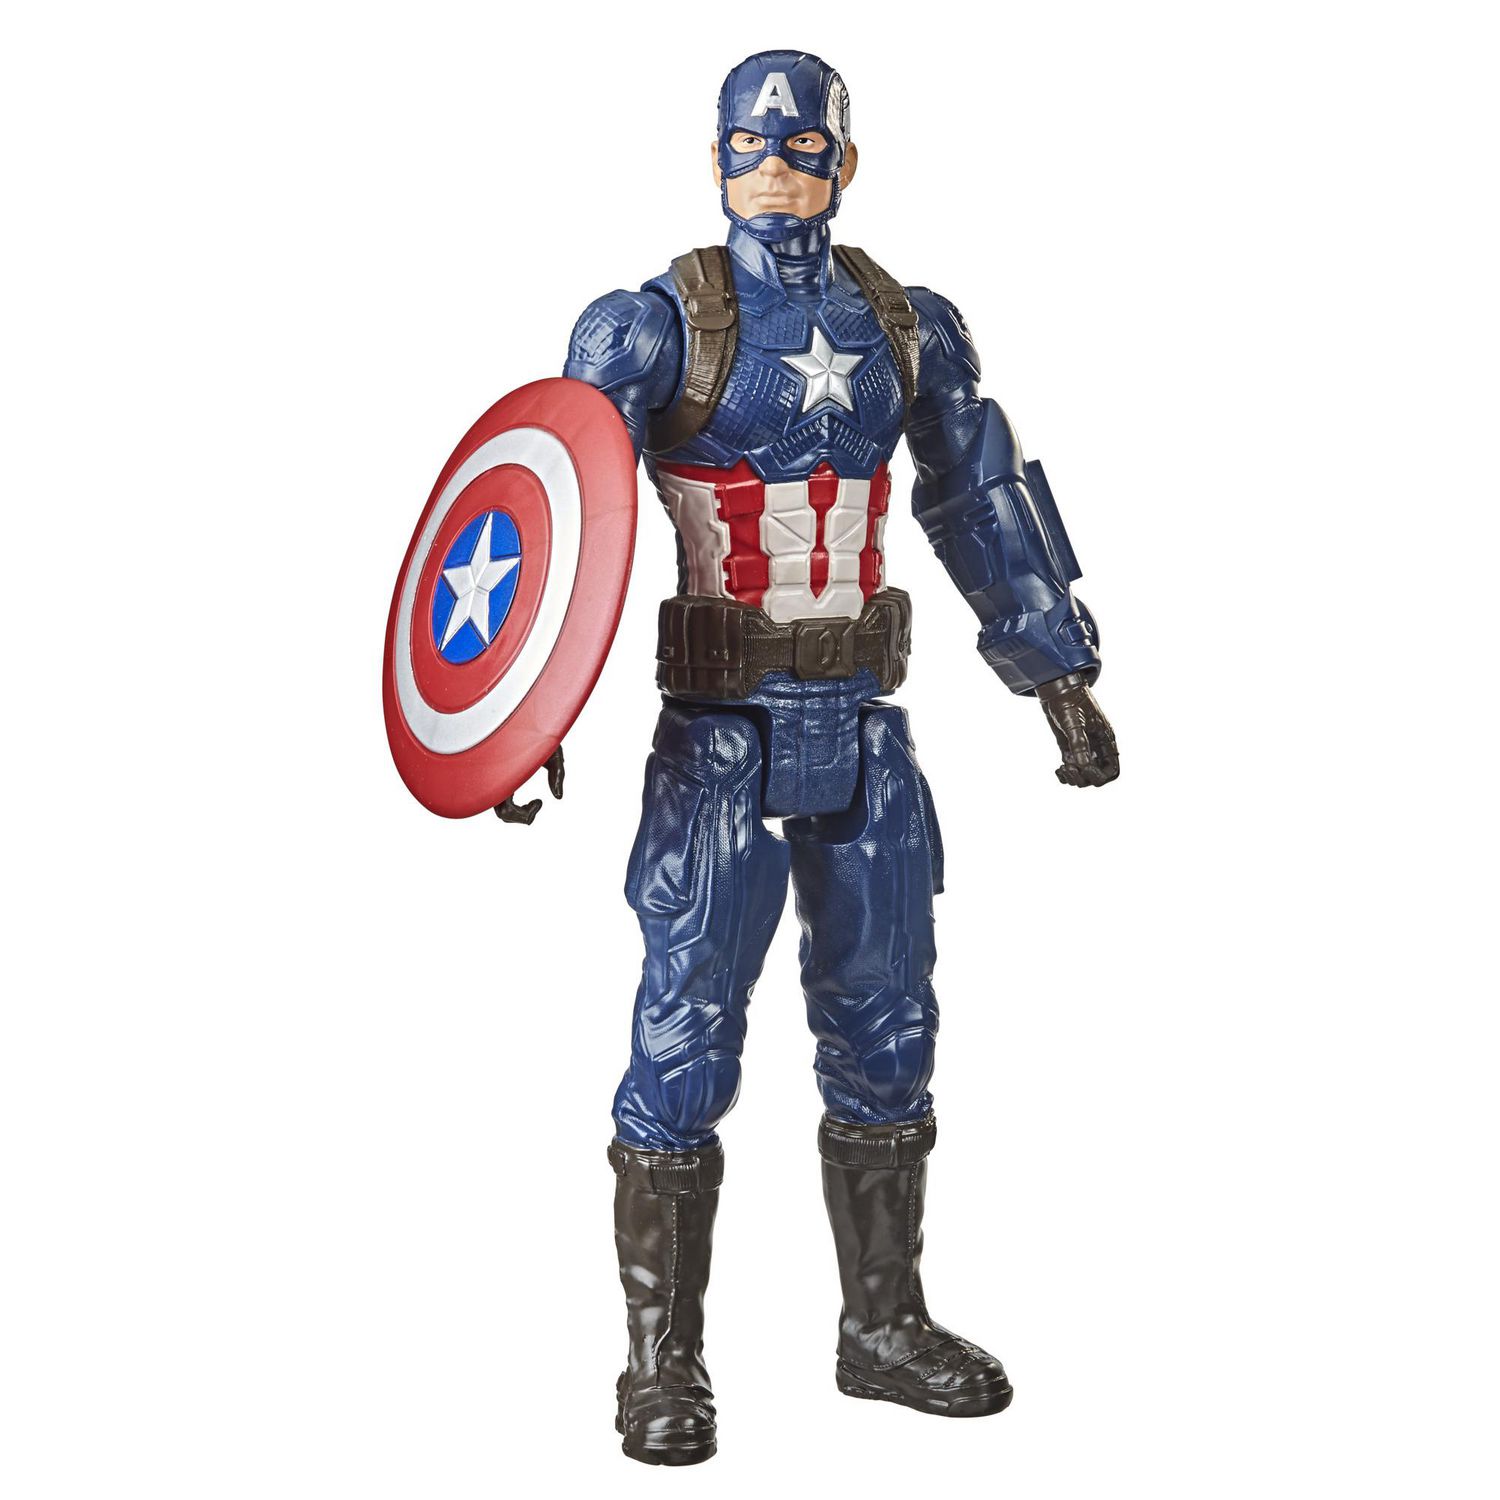 12" The Avengers Marvel Captain America Action Figures Kids Collectible Toy Gift 